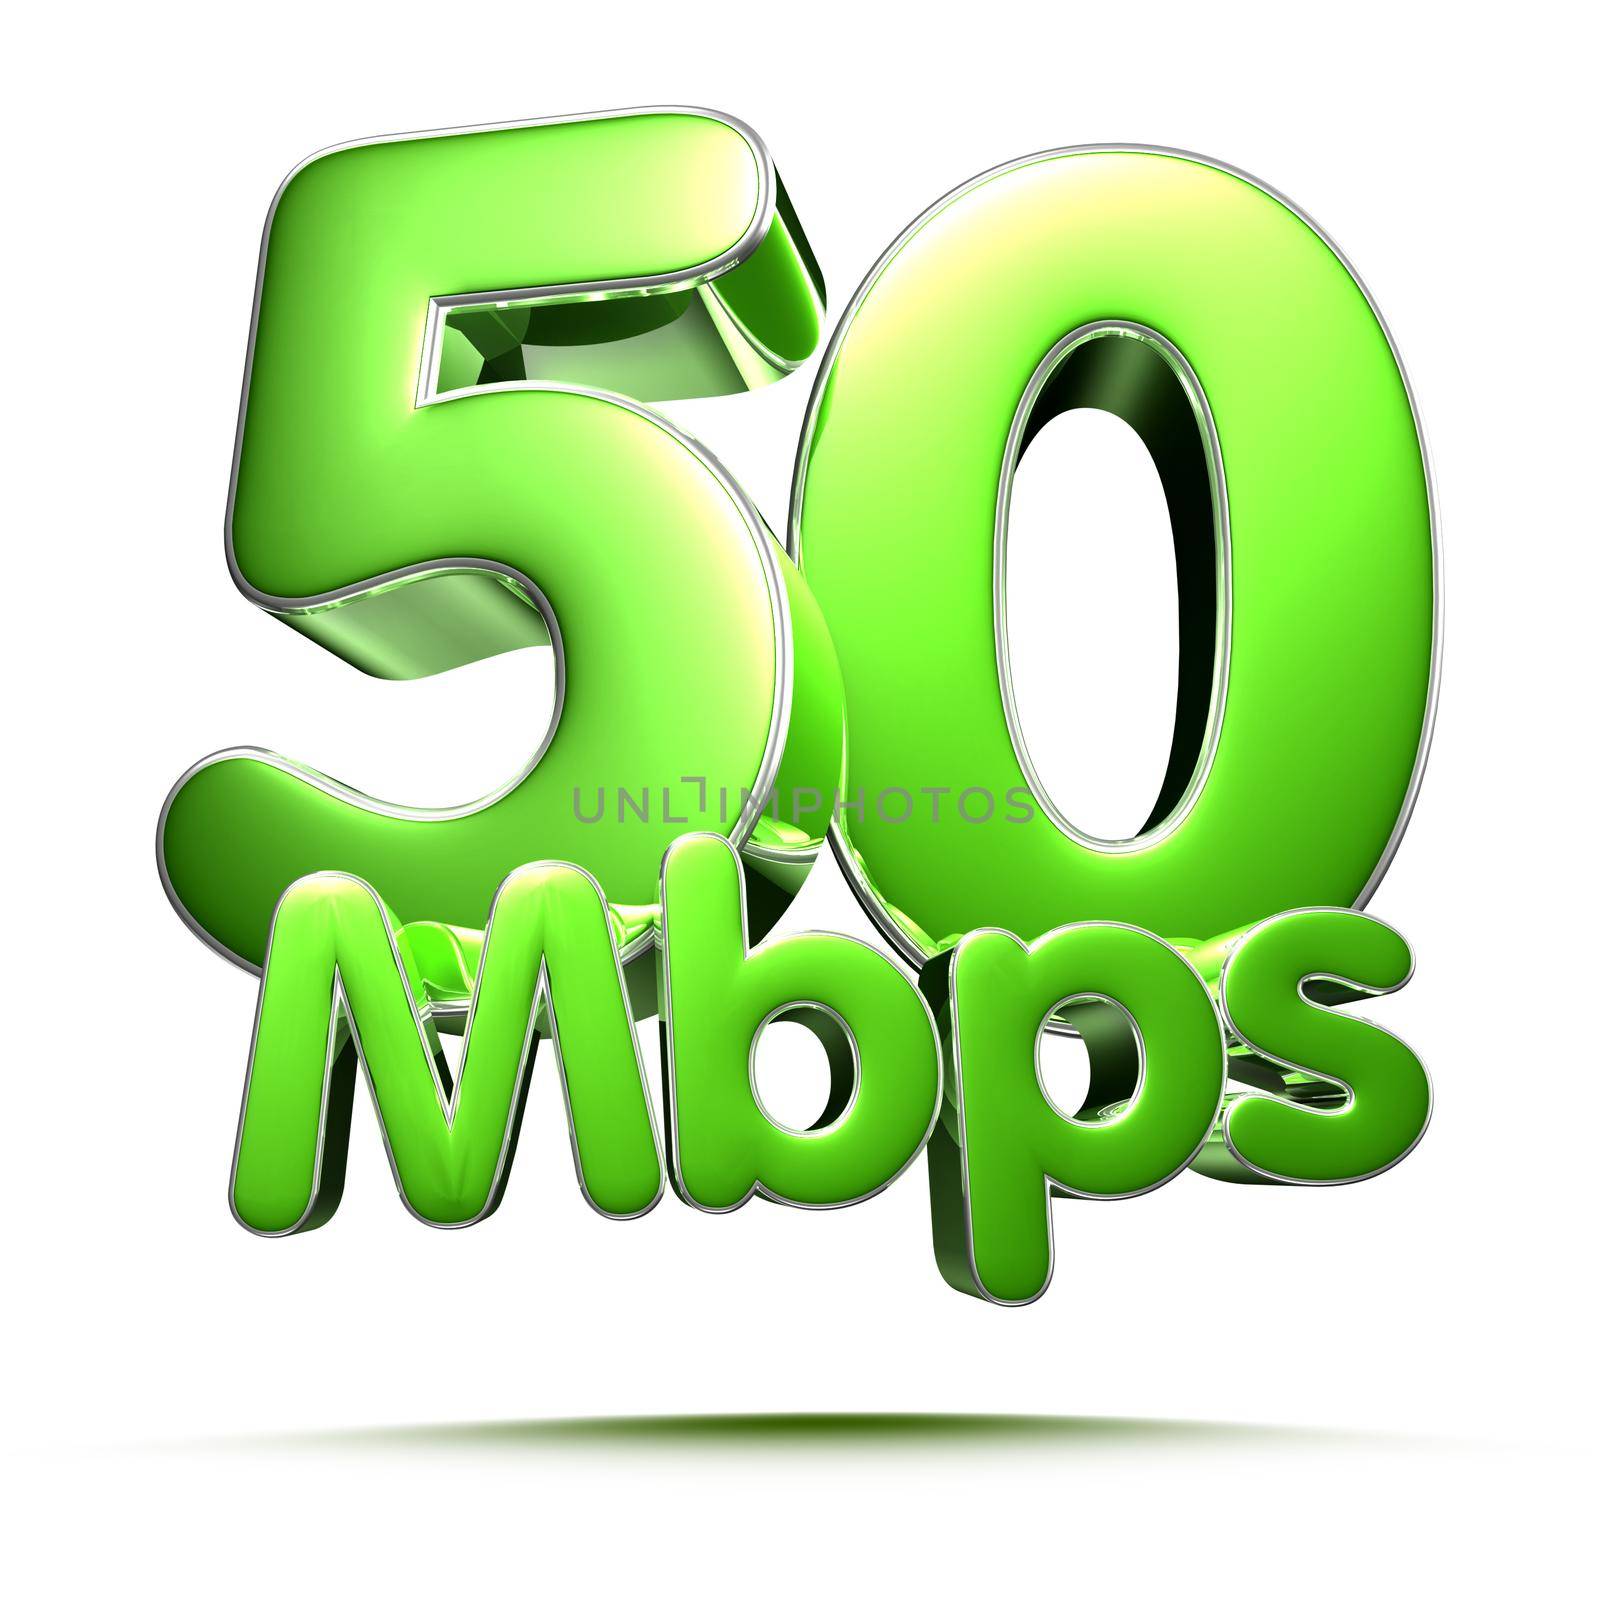 50 Mbps green 3D illustration on white background with clipping path. by thitimontoyai